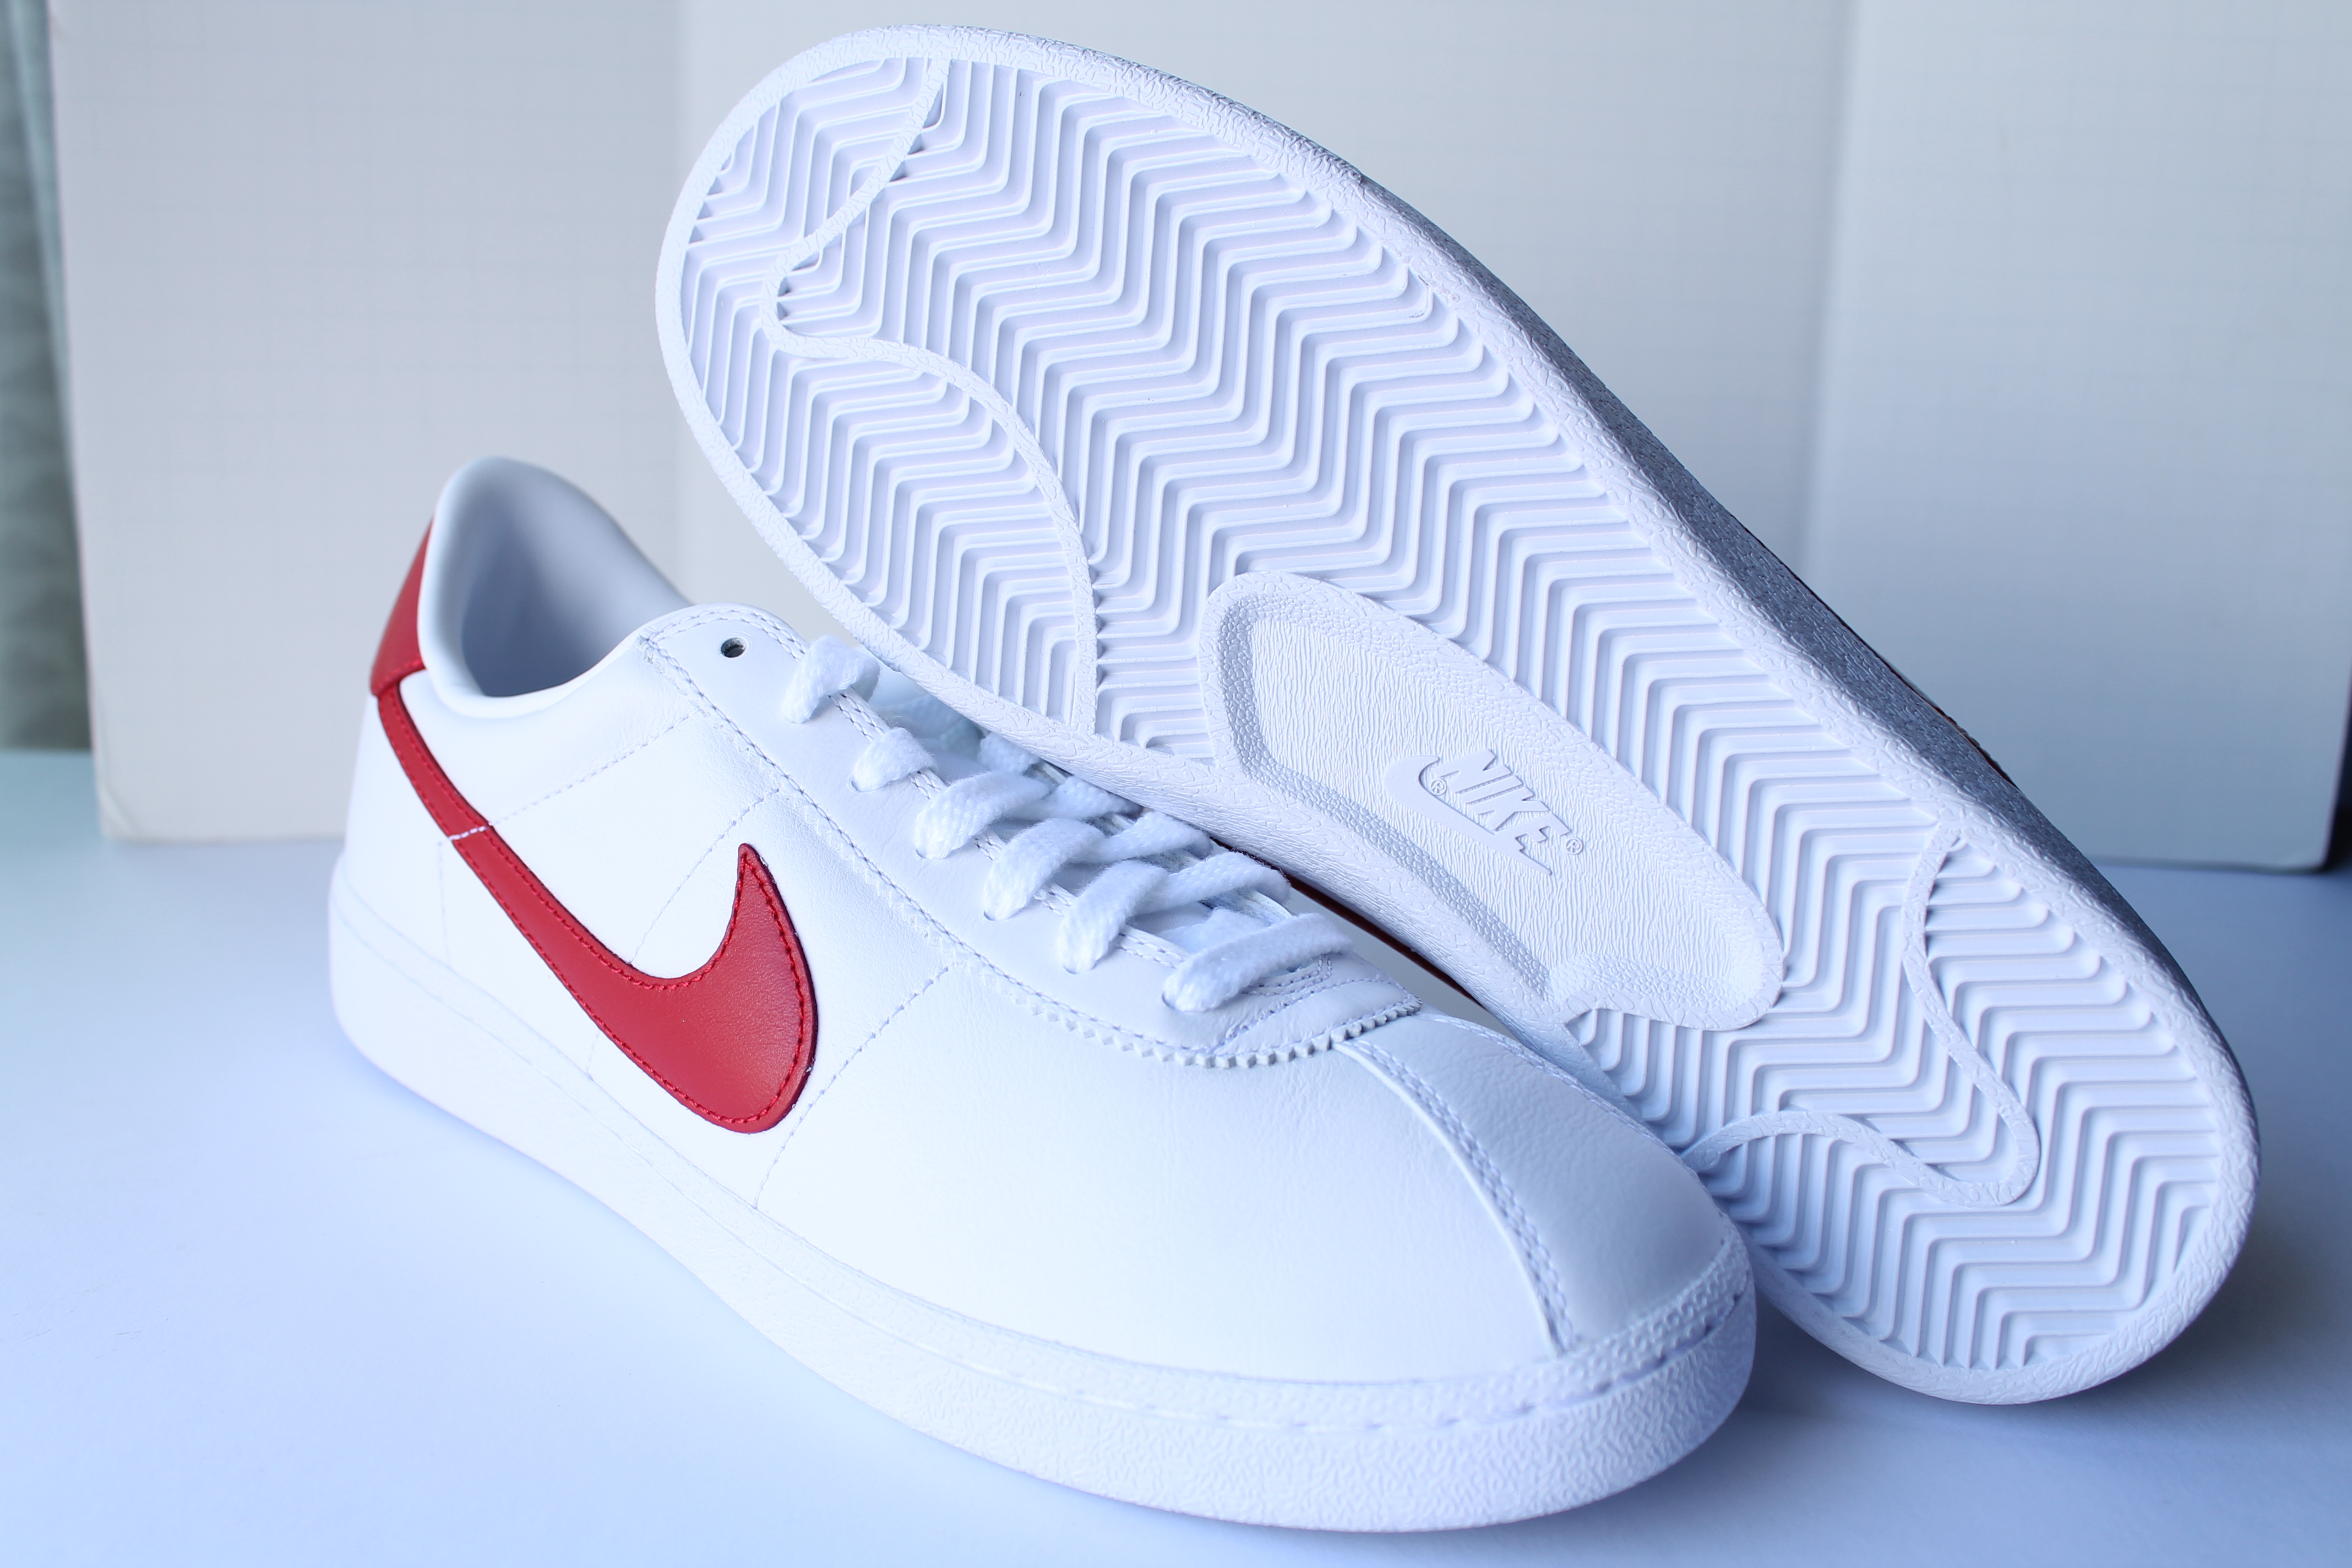 back to the future white nike shoes